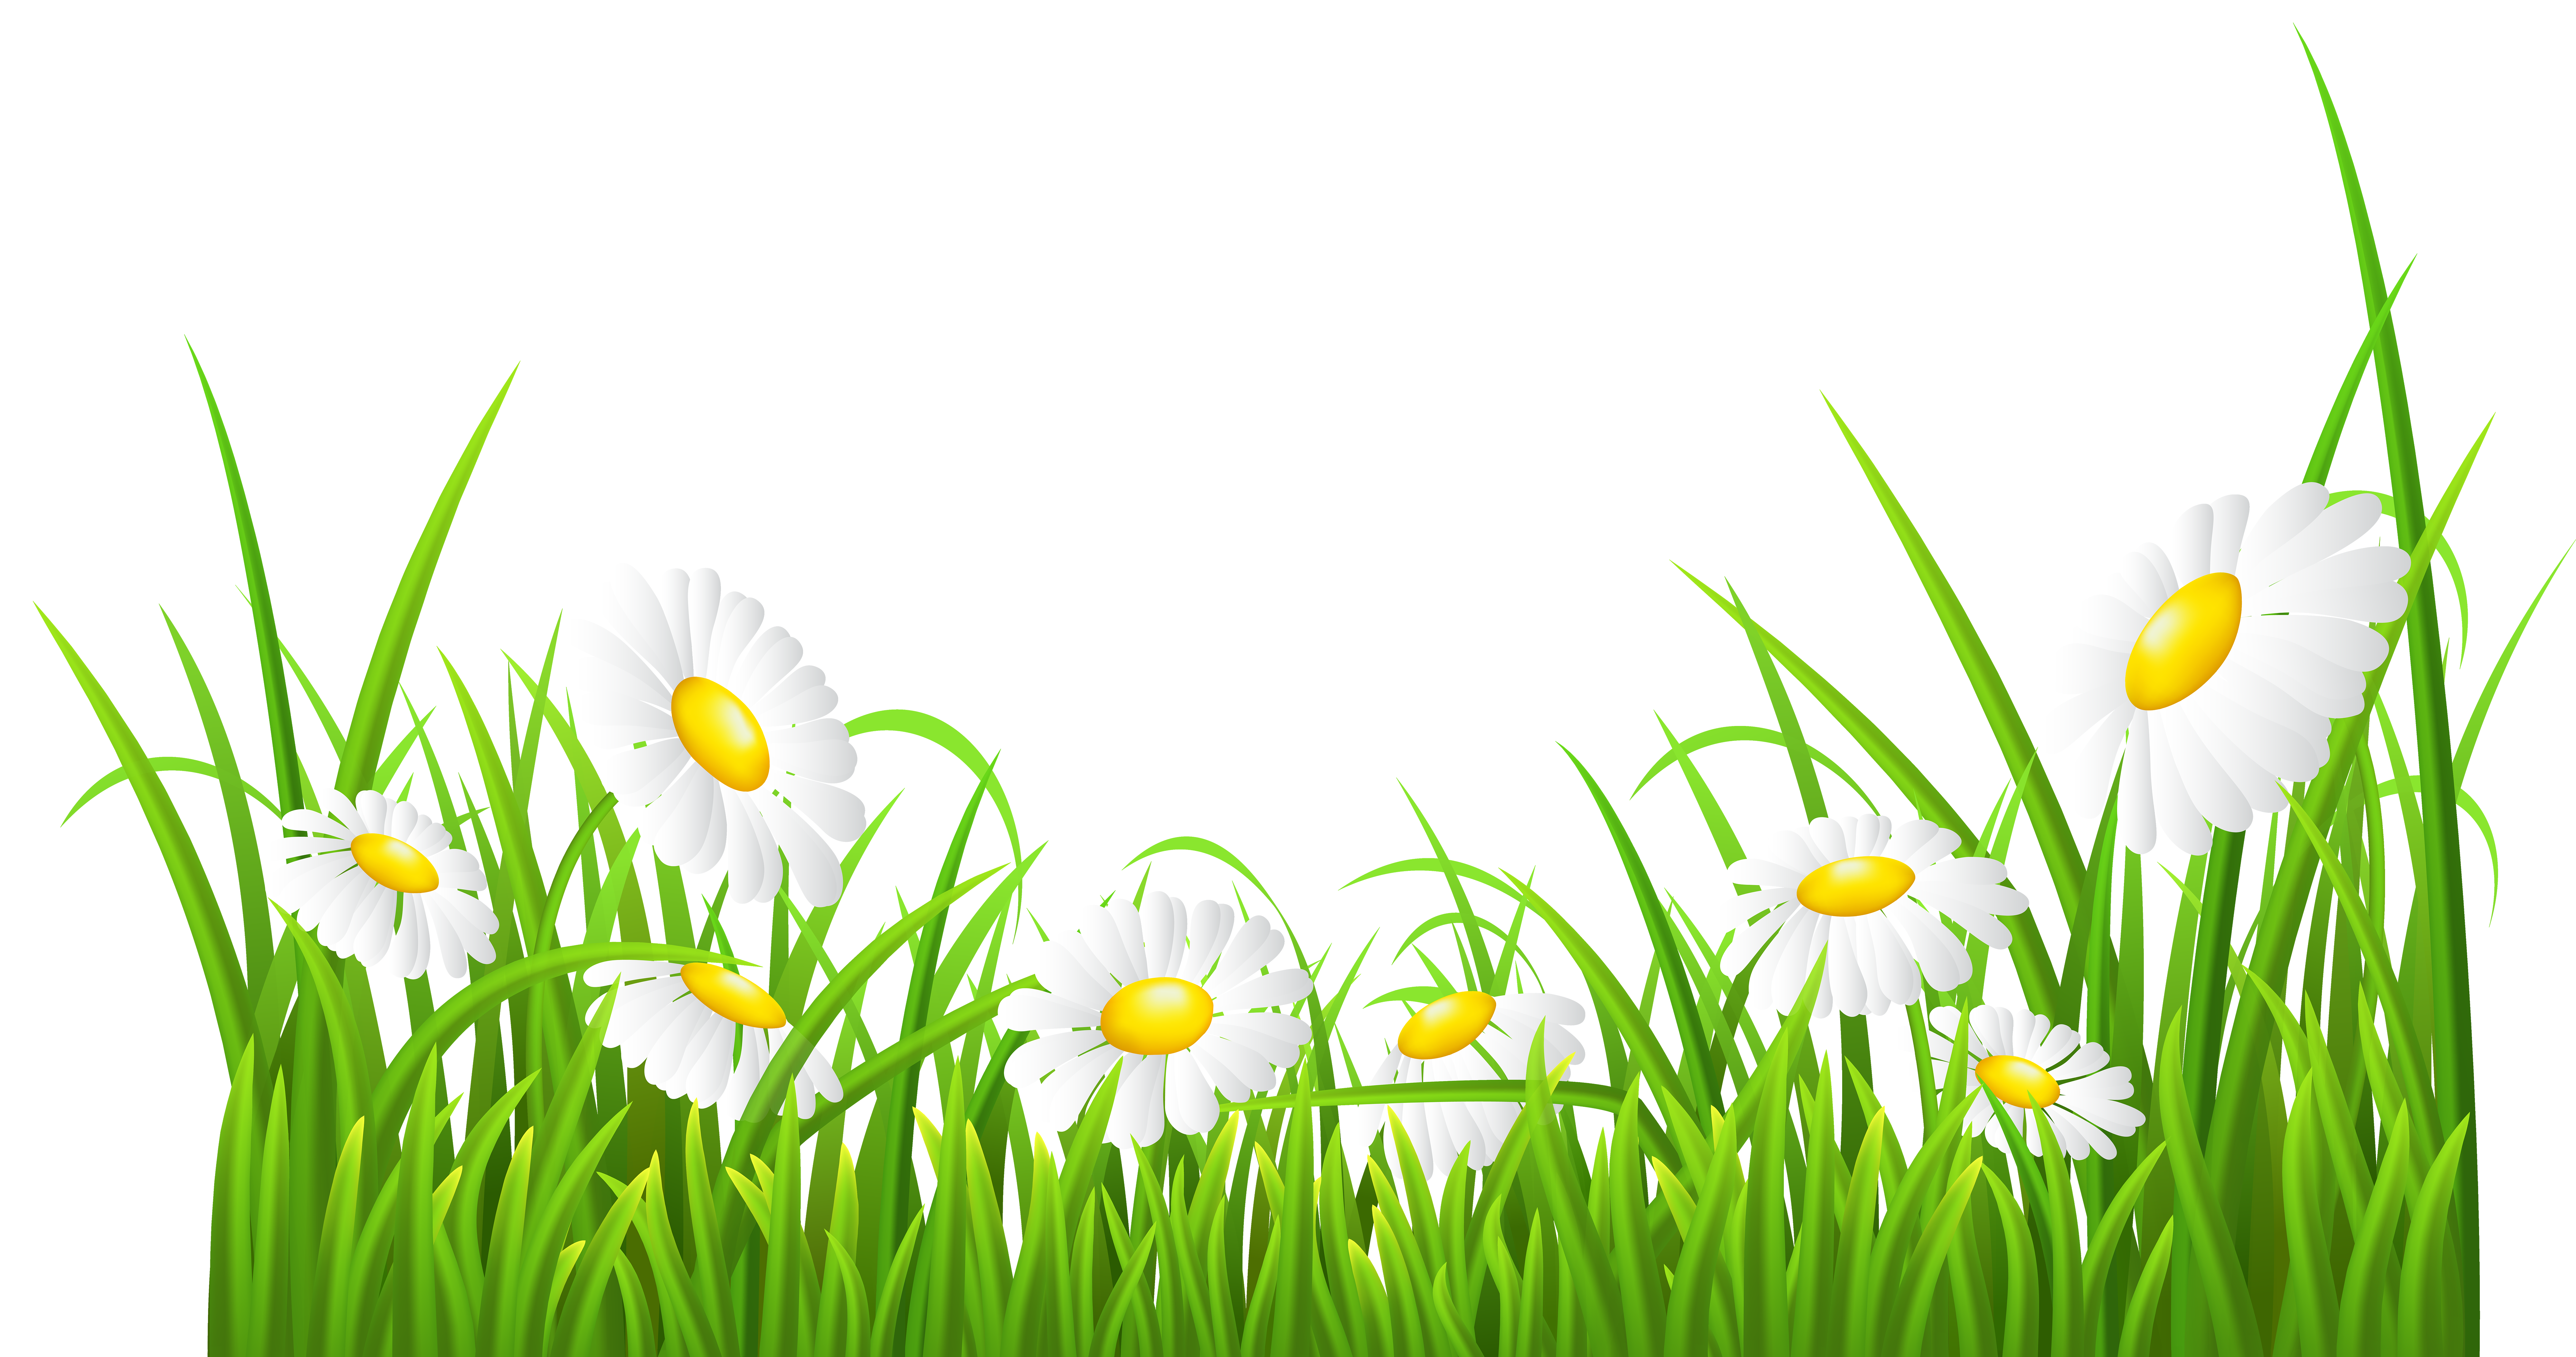 Clipart park grass. White daisies and transparent